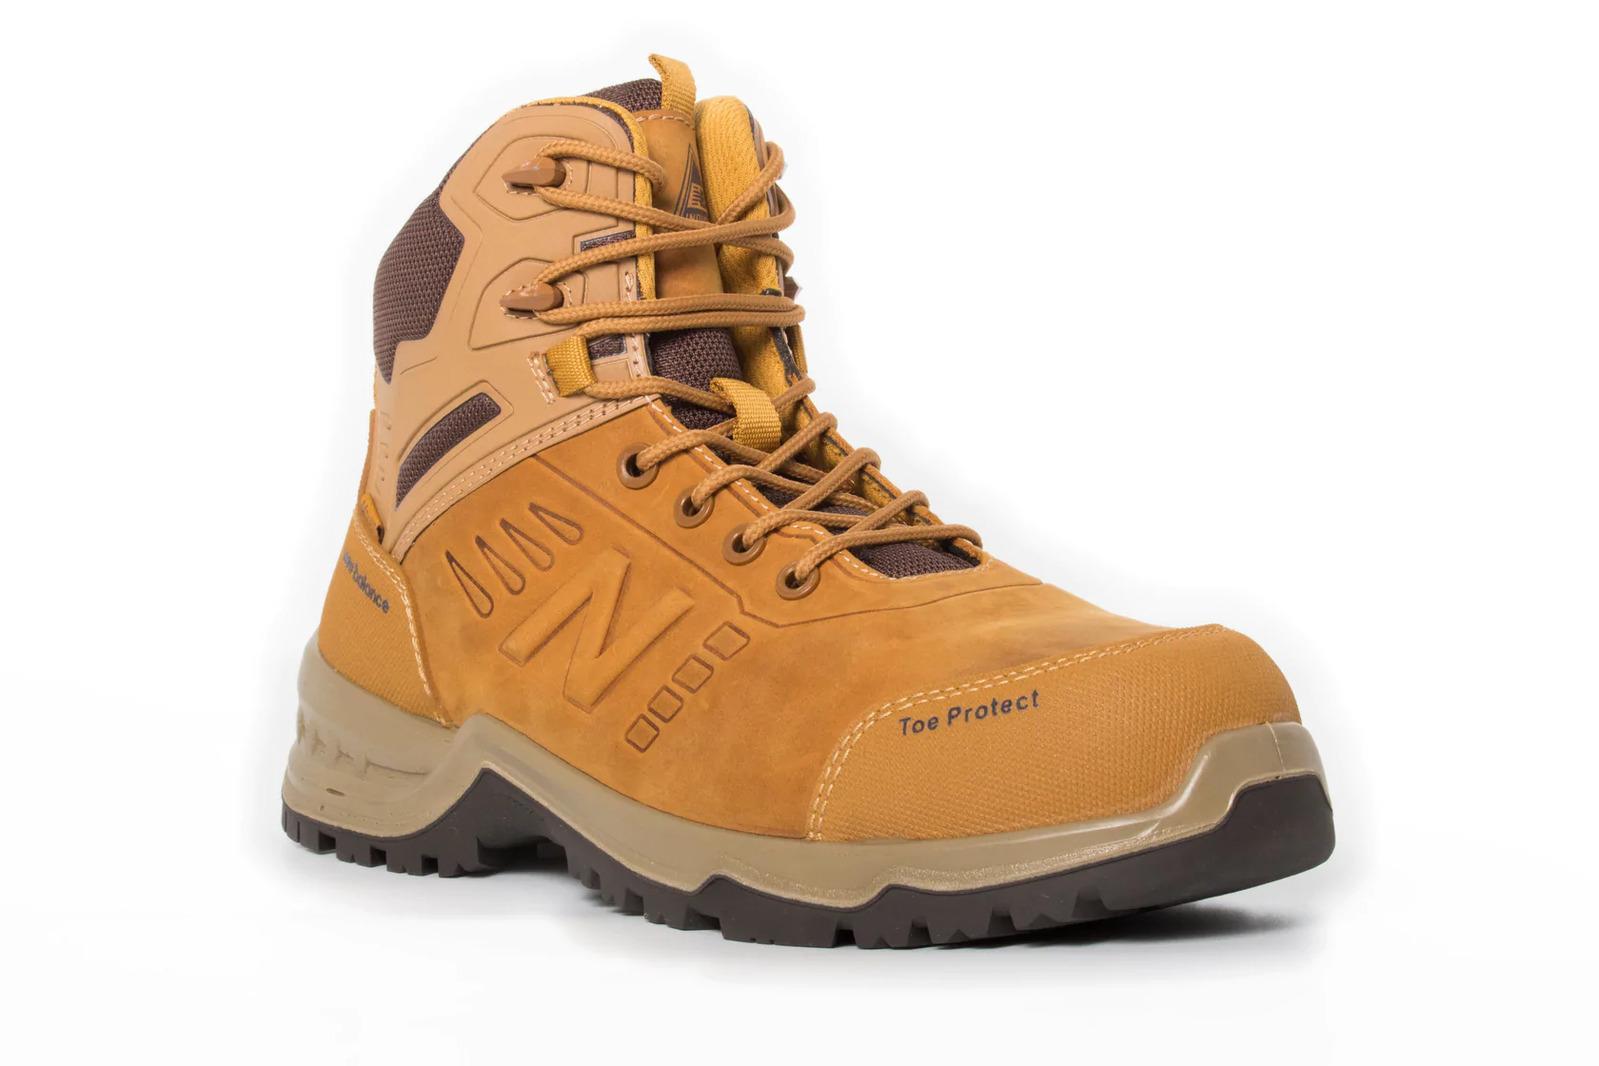 New Balance Mens Contour Steel Toe Cap Safety Work Boots with Zip - Wheat - US 10 Width:4E